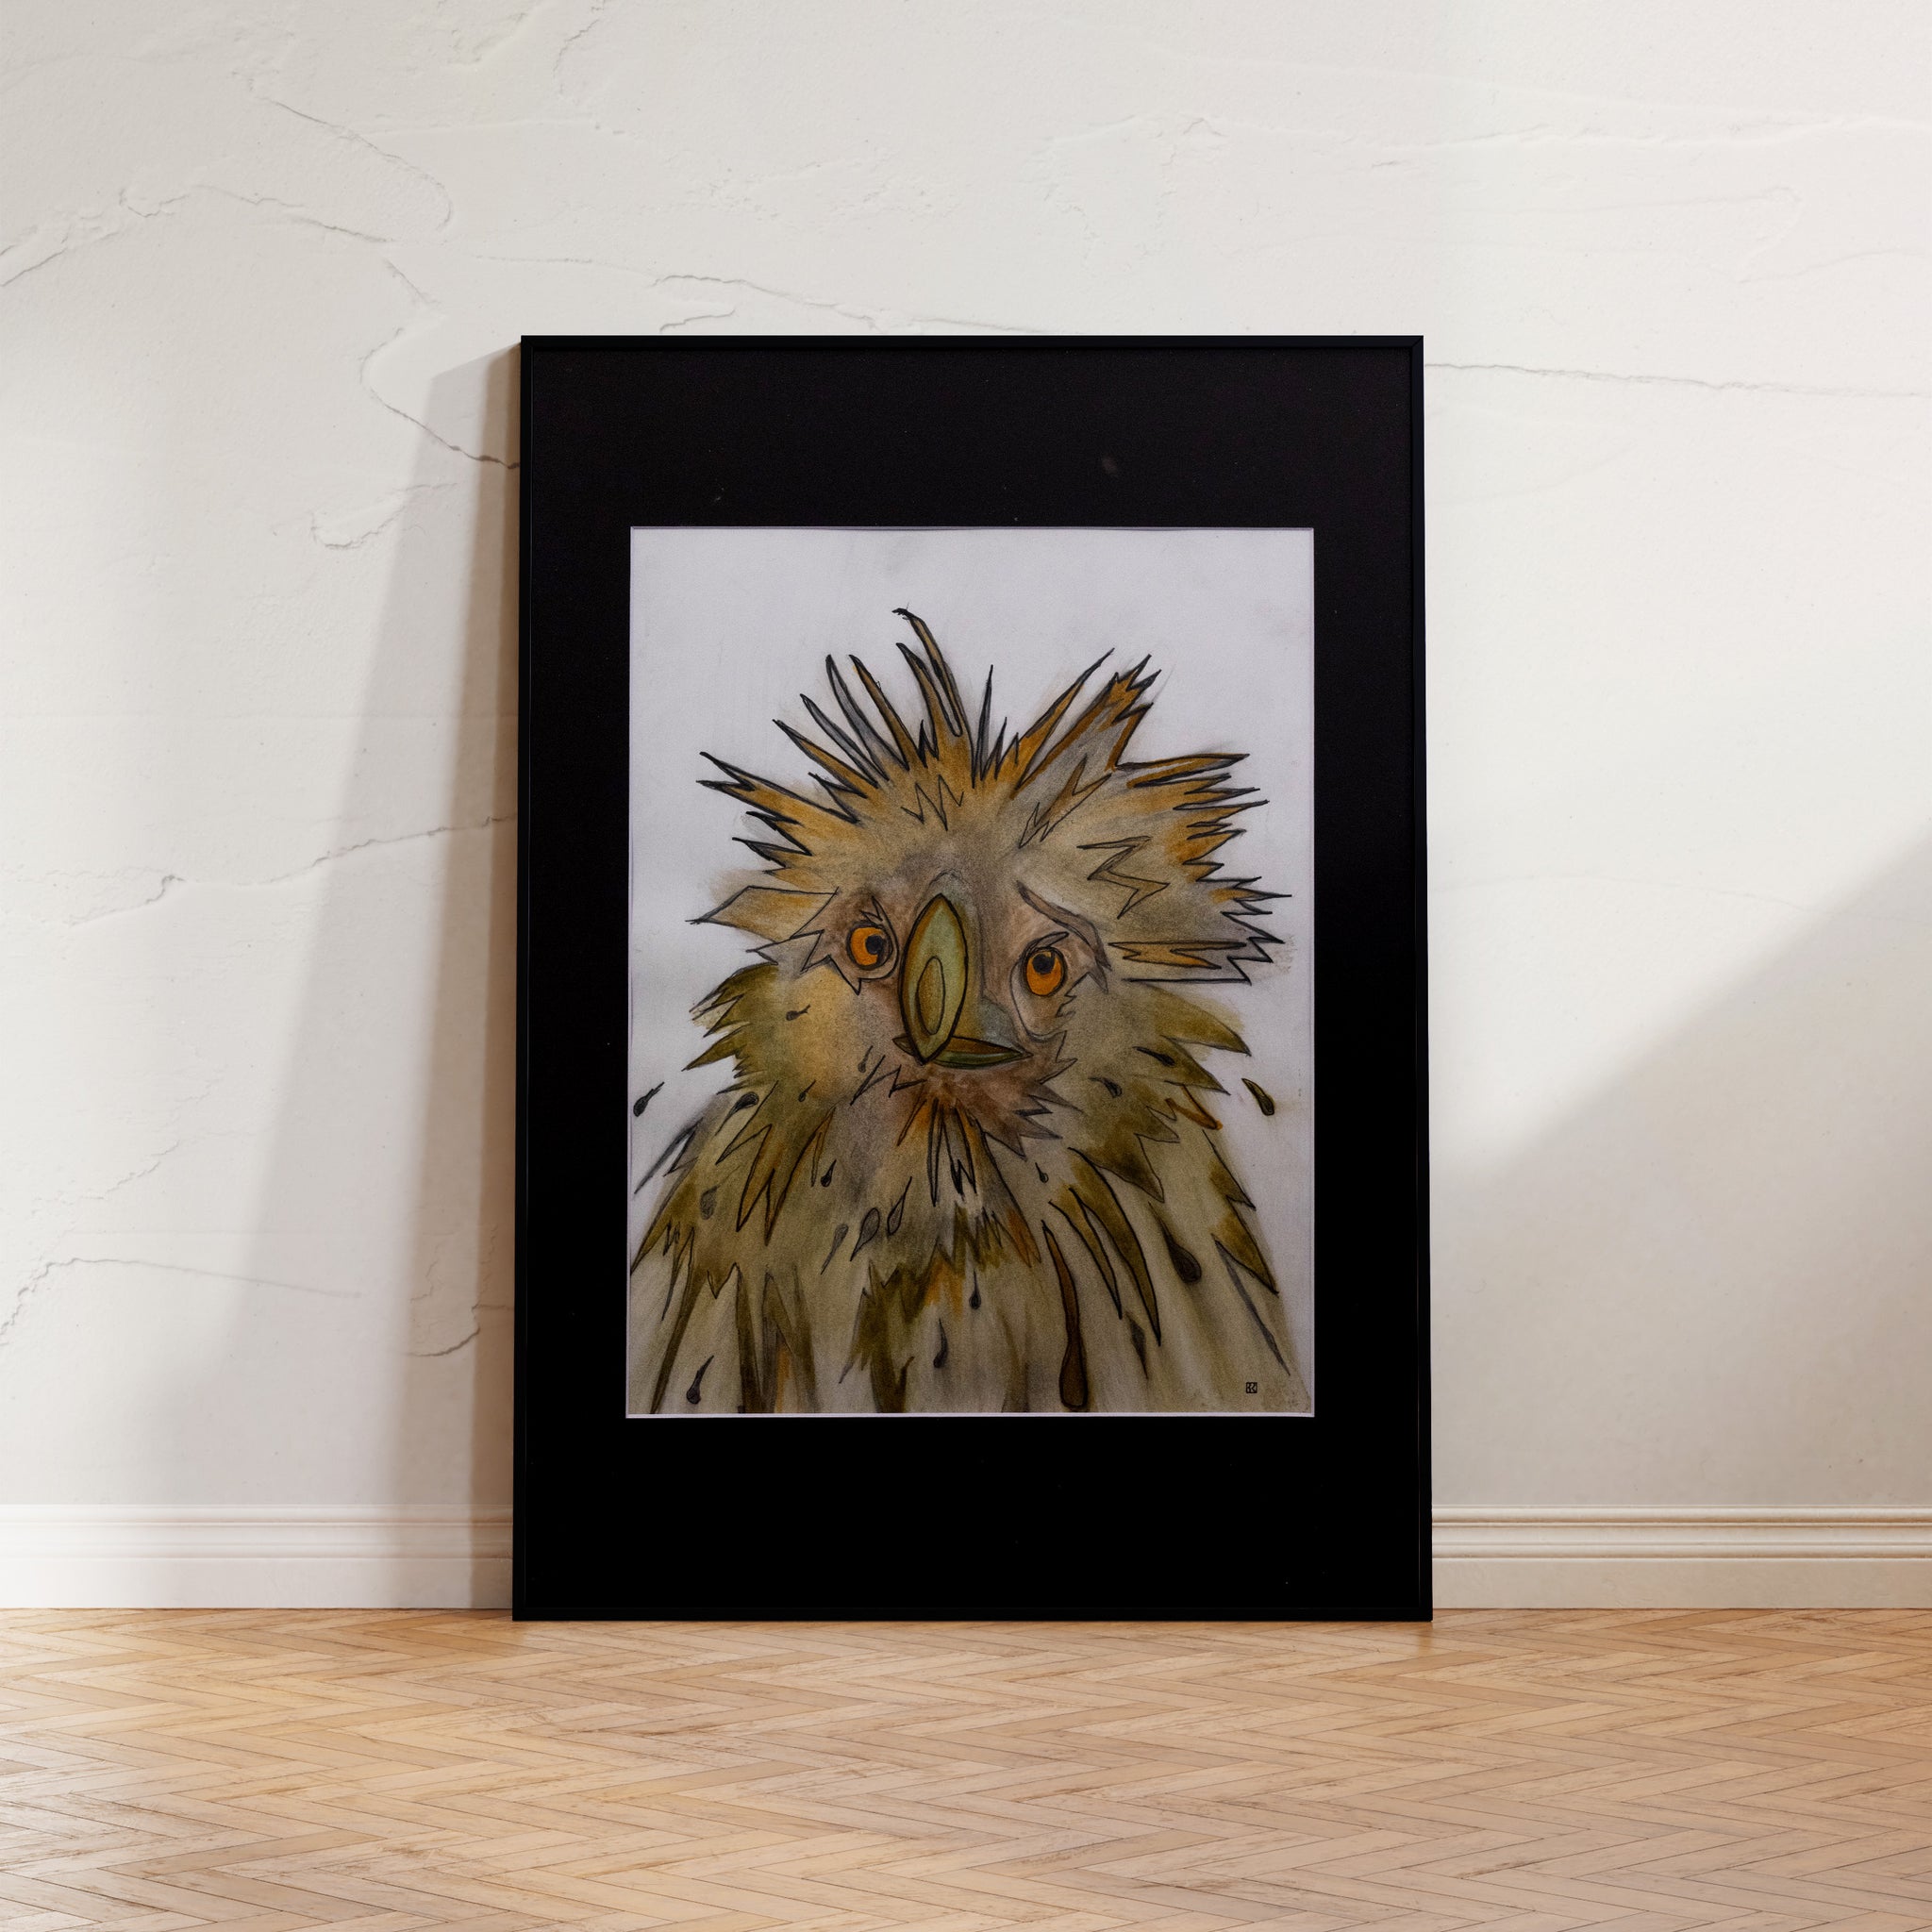 A watercolor print depicting an eagle's majesty, illuminating its detailed feathers and watchful eye in earthy brown and black tones. A symbol of courage, intuition, and resilience.